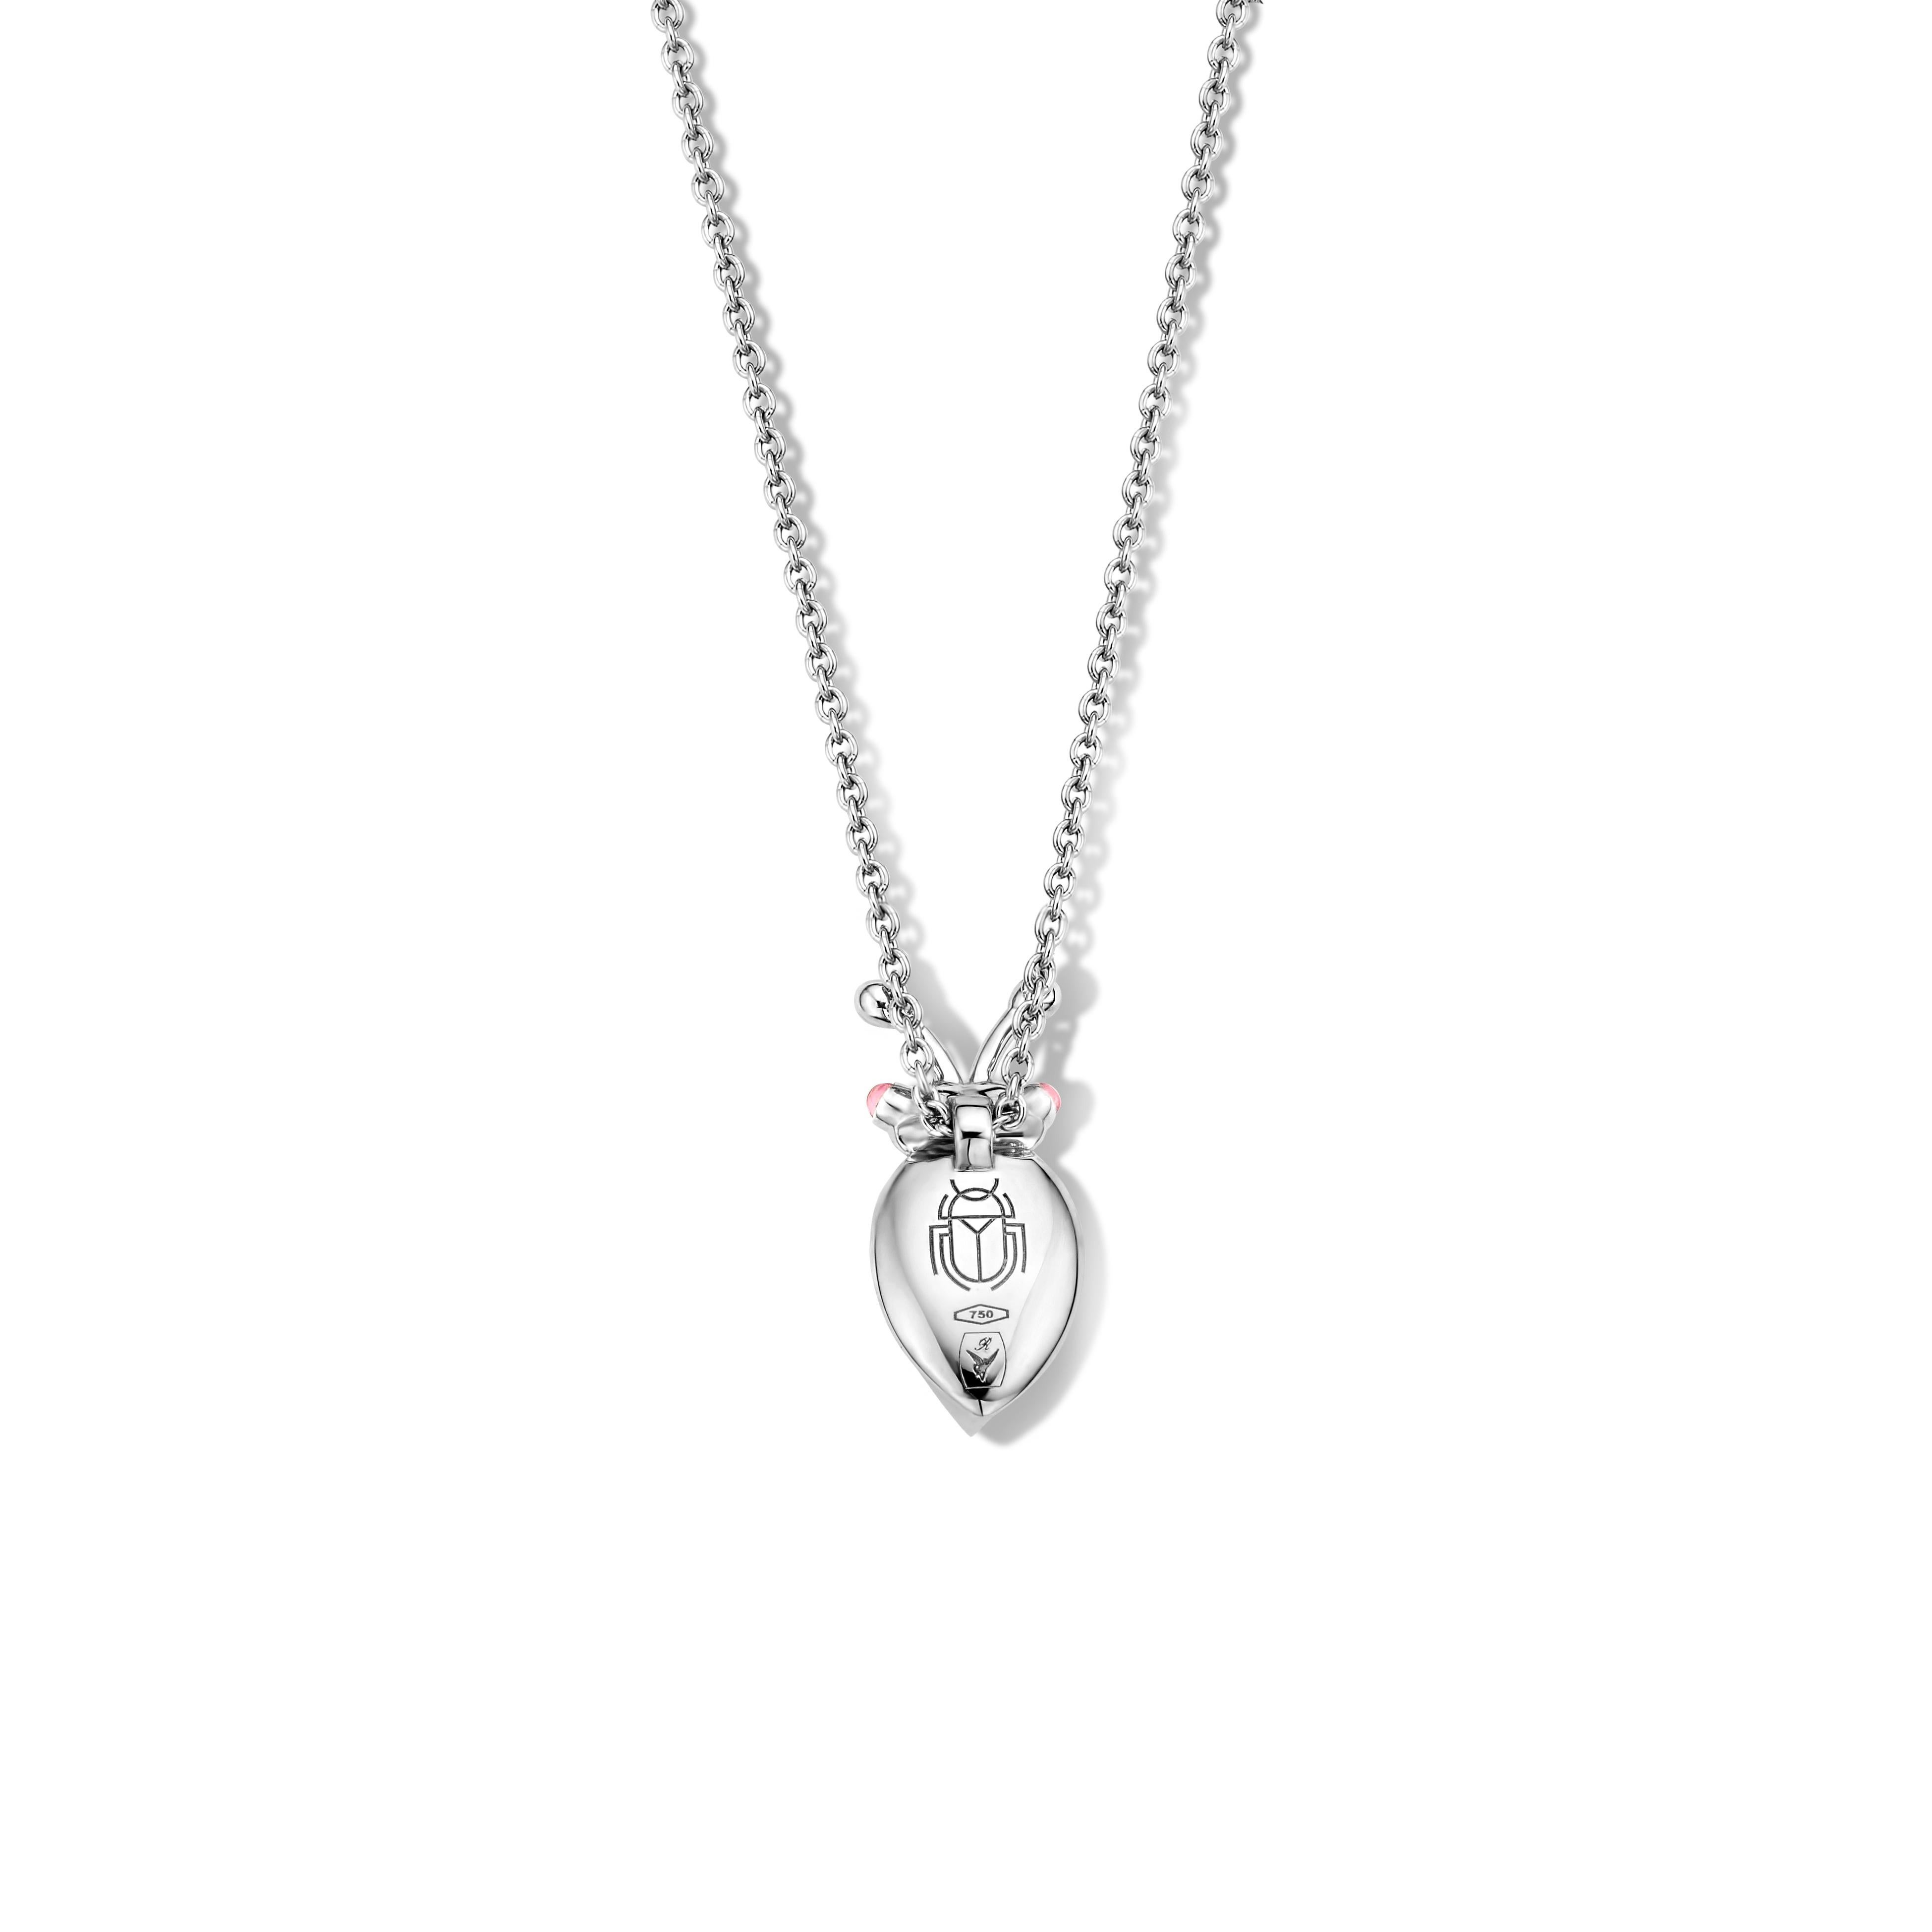 One-of-a-kind lucky beetle necklace in 18K white gold 6g created by jewelry designer Celine Roelens. This necklace is set with the finest diamonds in brilliant cut 0,04Ct (VVS/DEF quality) and one natural, pink tourmaline in pear cabochon cut. The